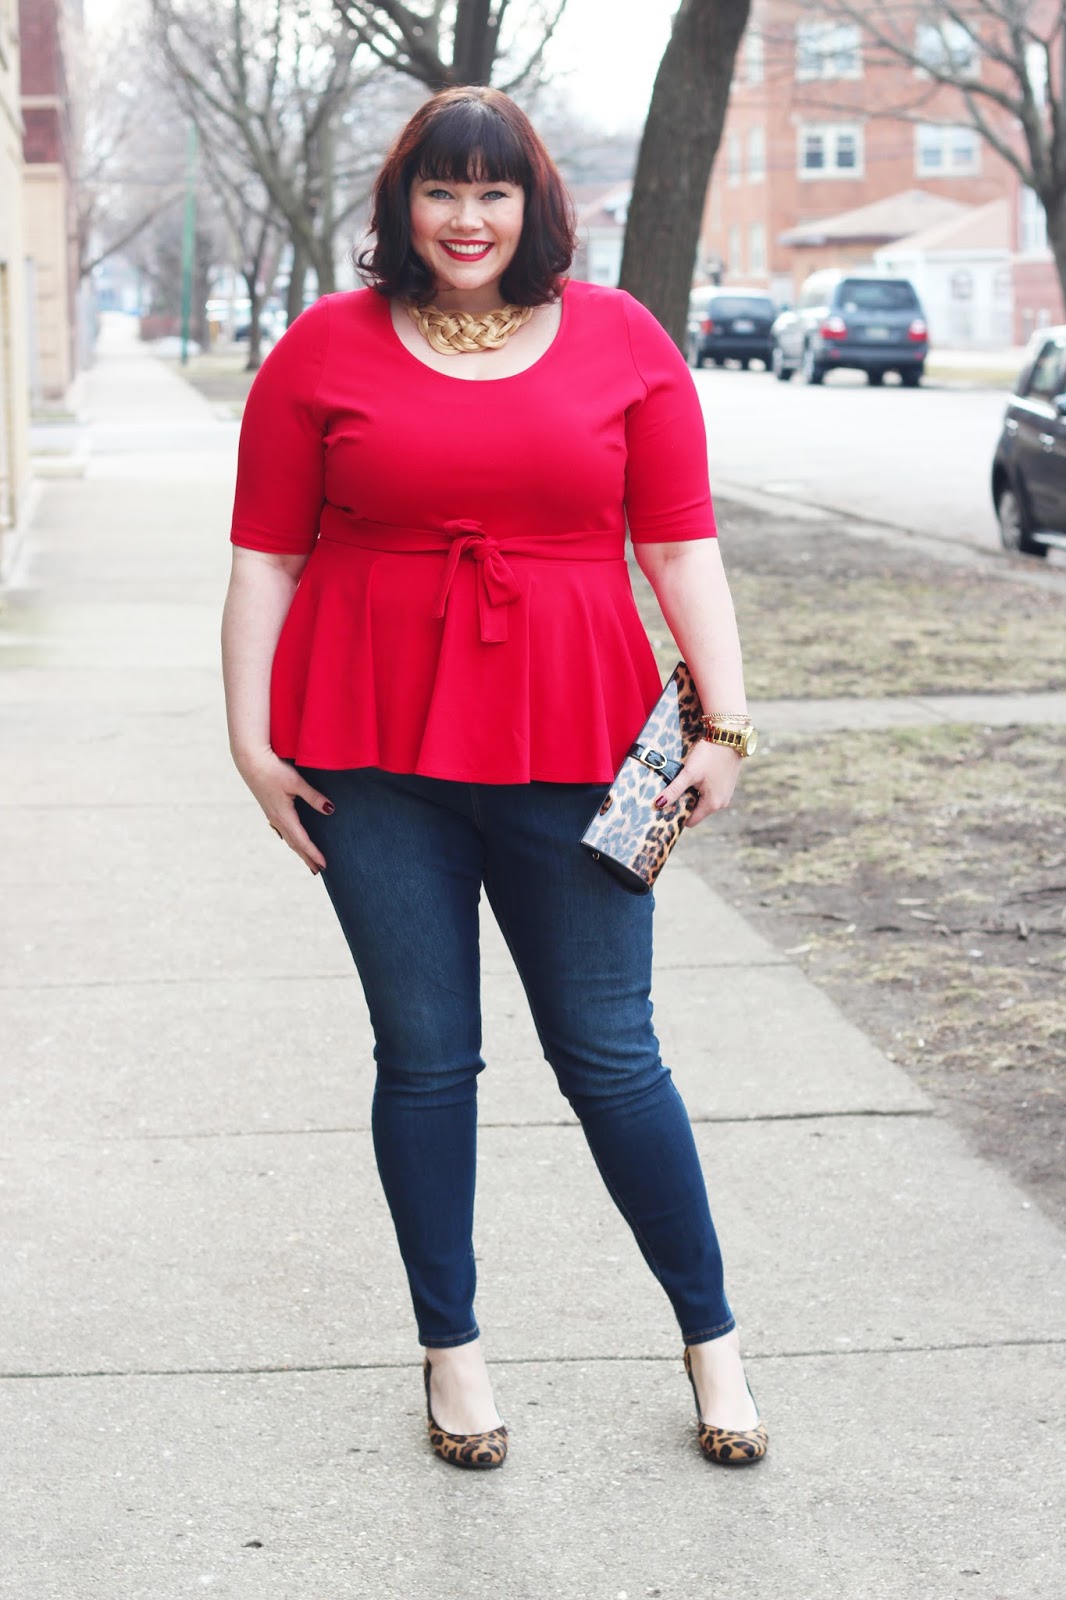 plus size red skinny jeans